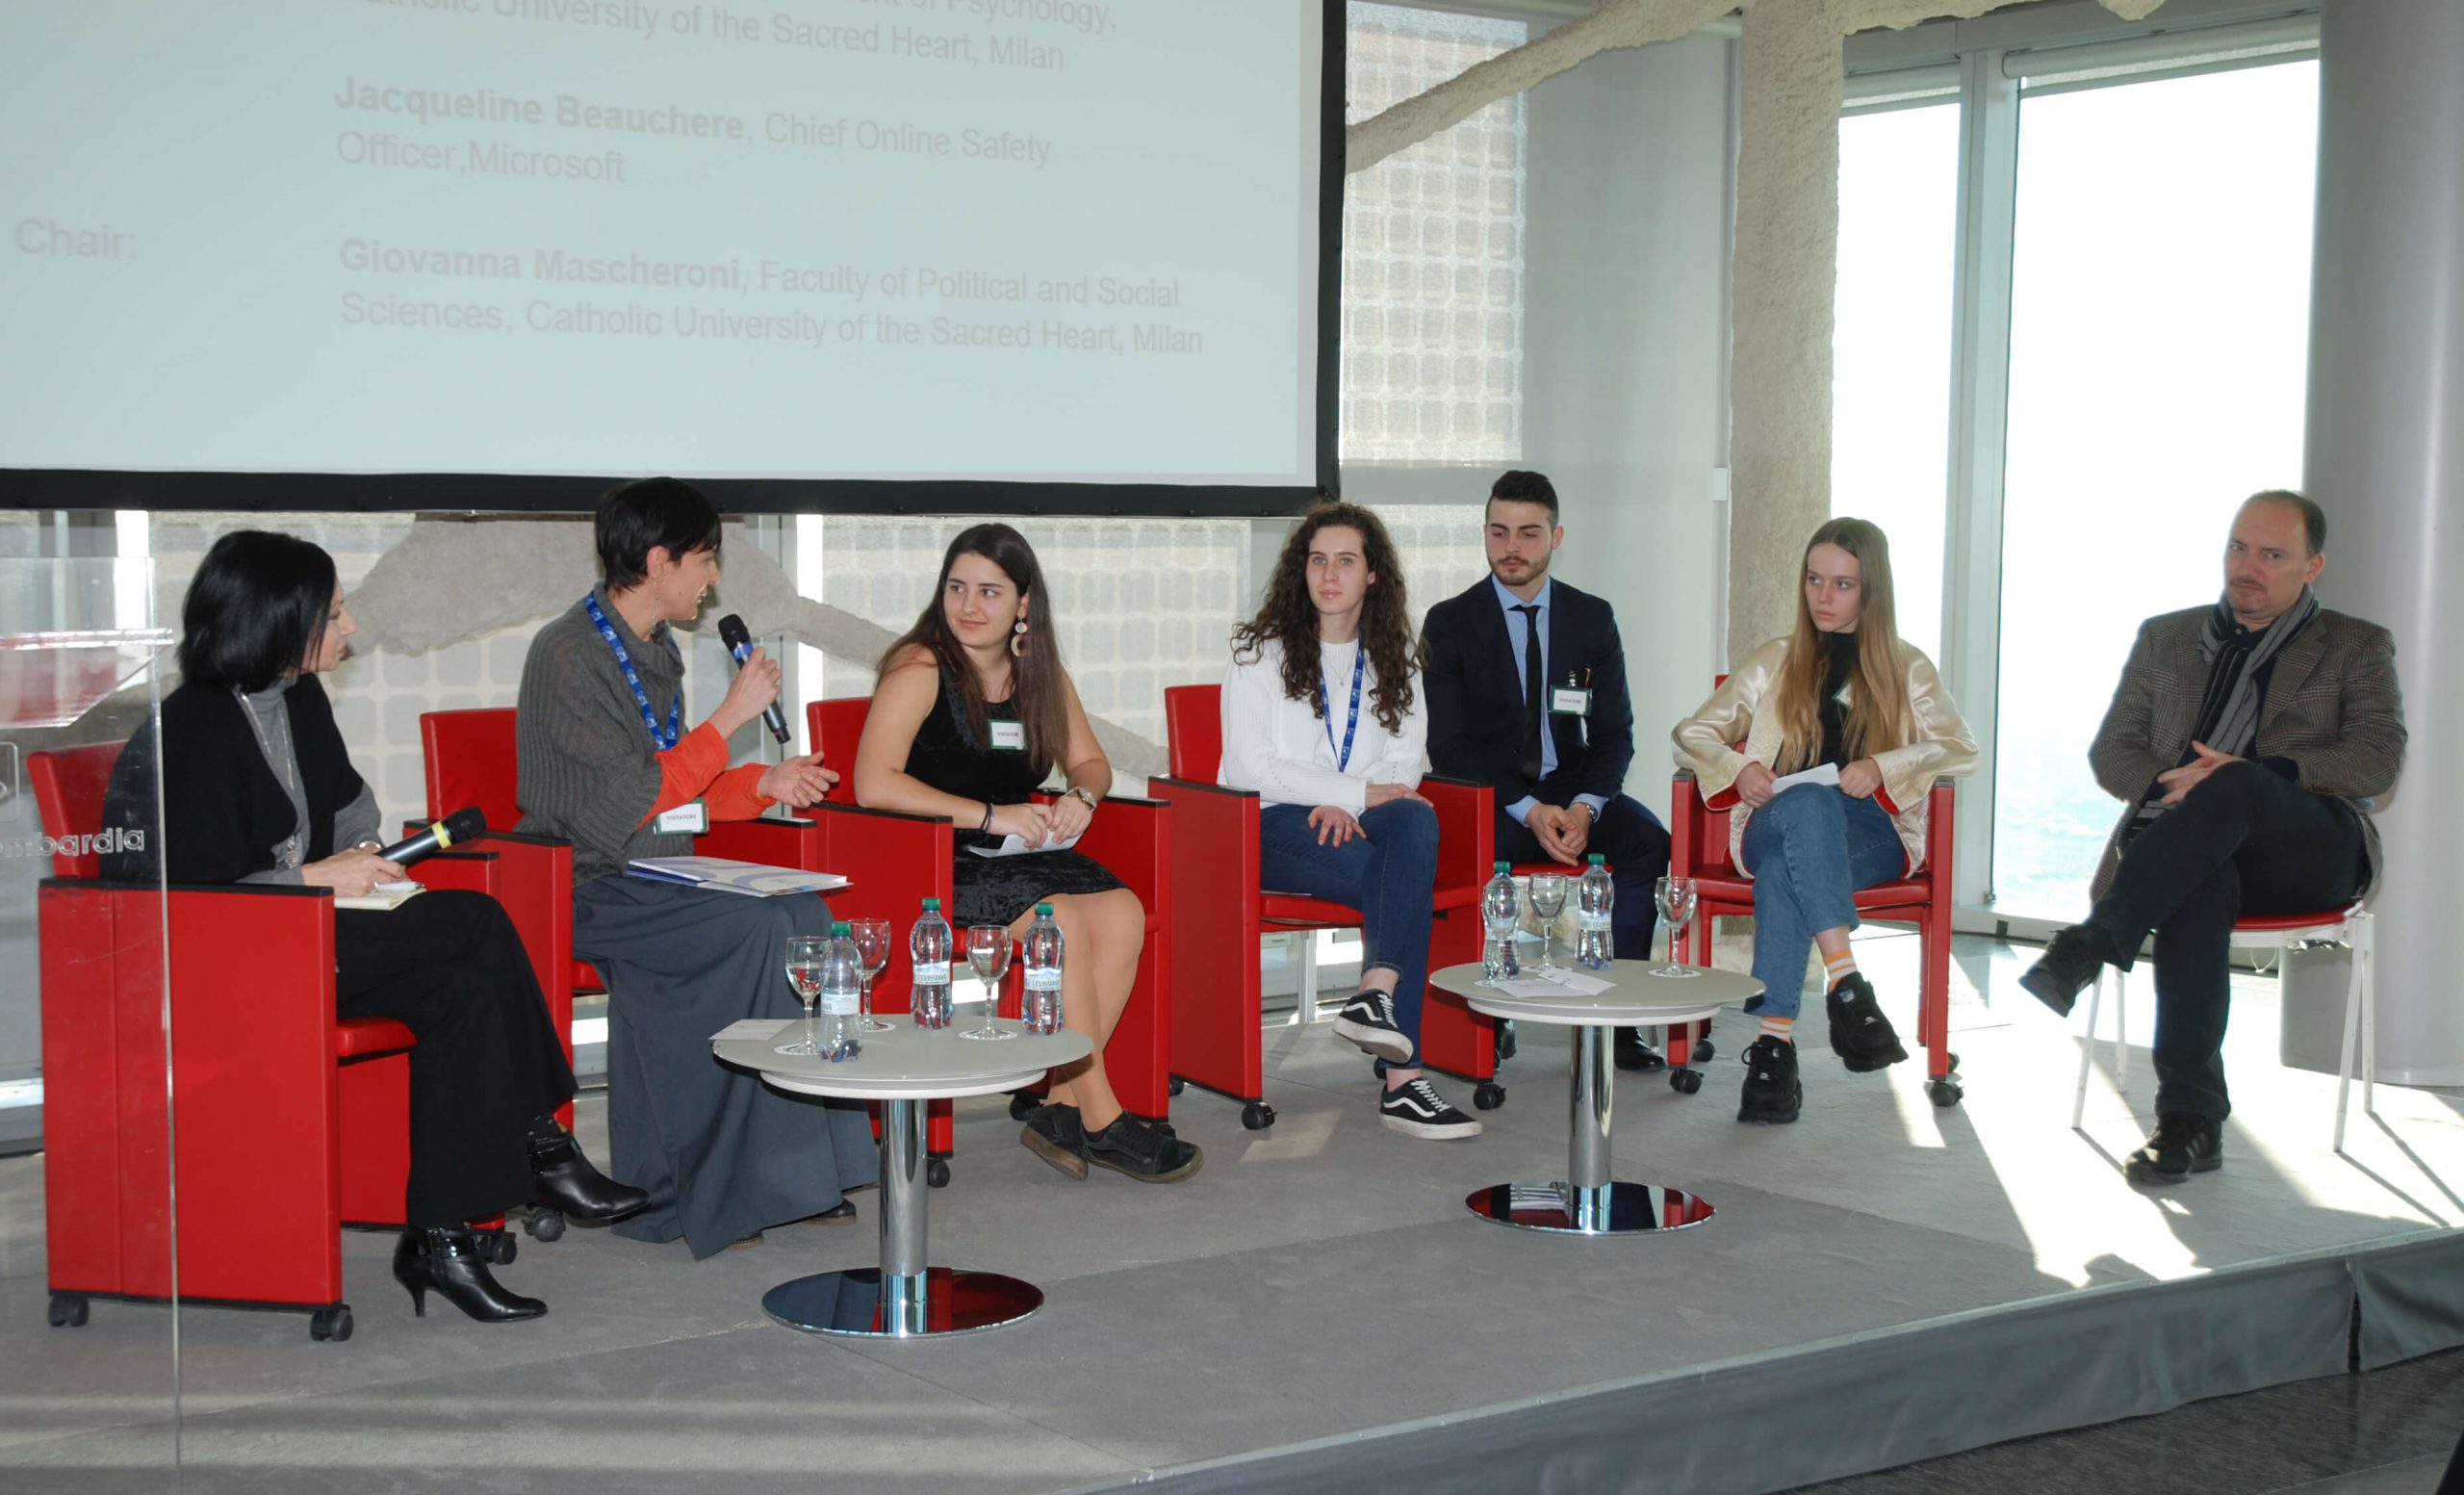 Jacqueline Beauchere participates in a panel discussion on online well-being with teens and researchers in Milan, Italy.